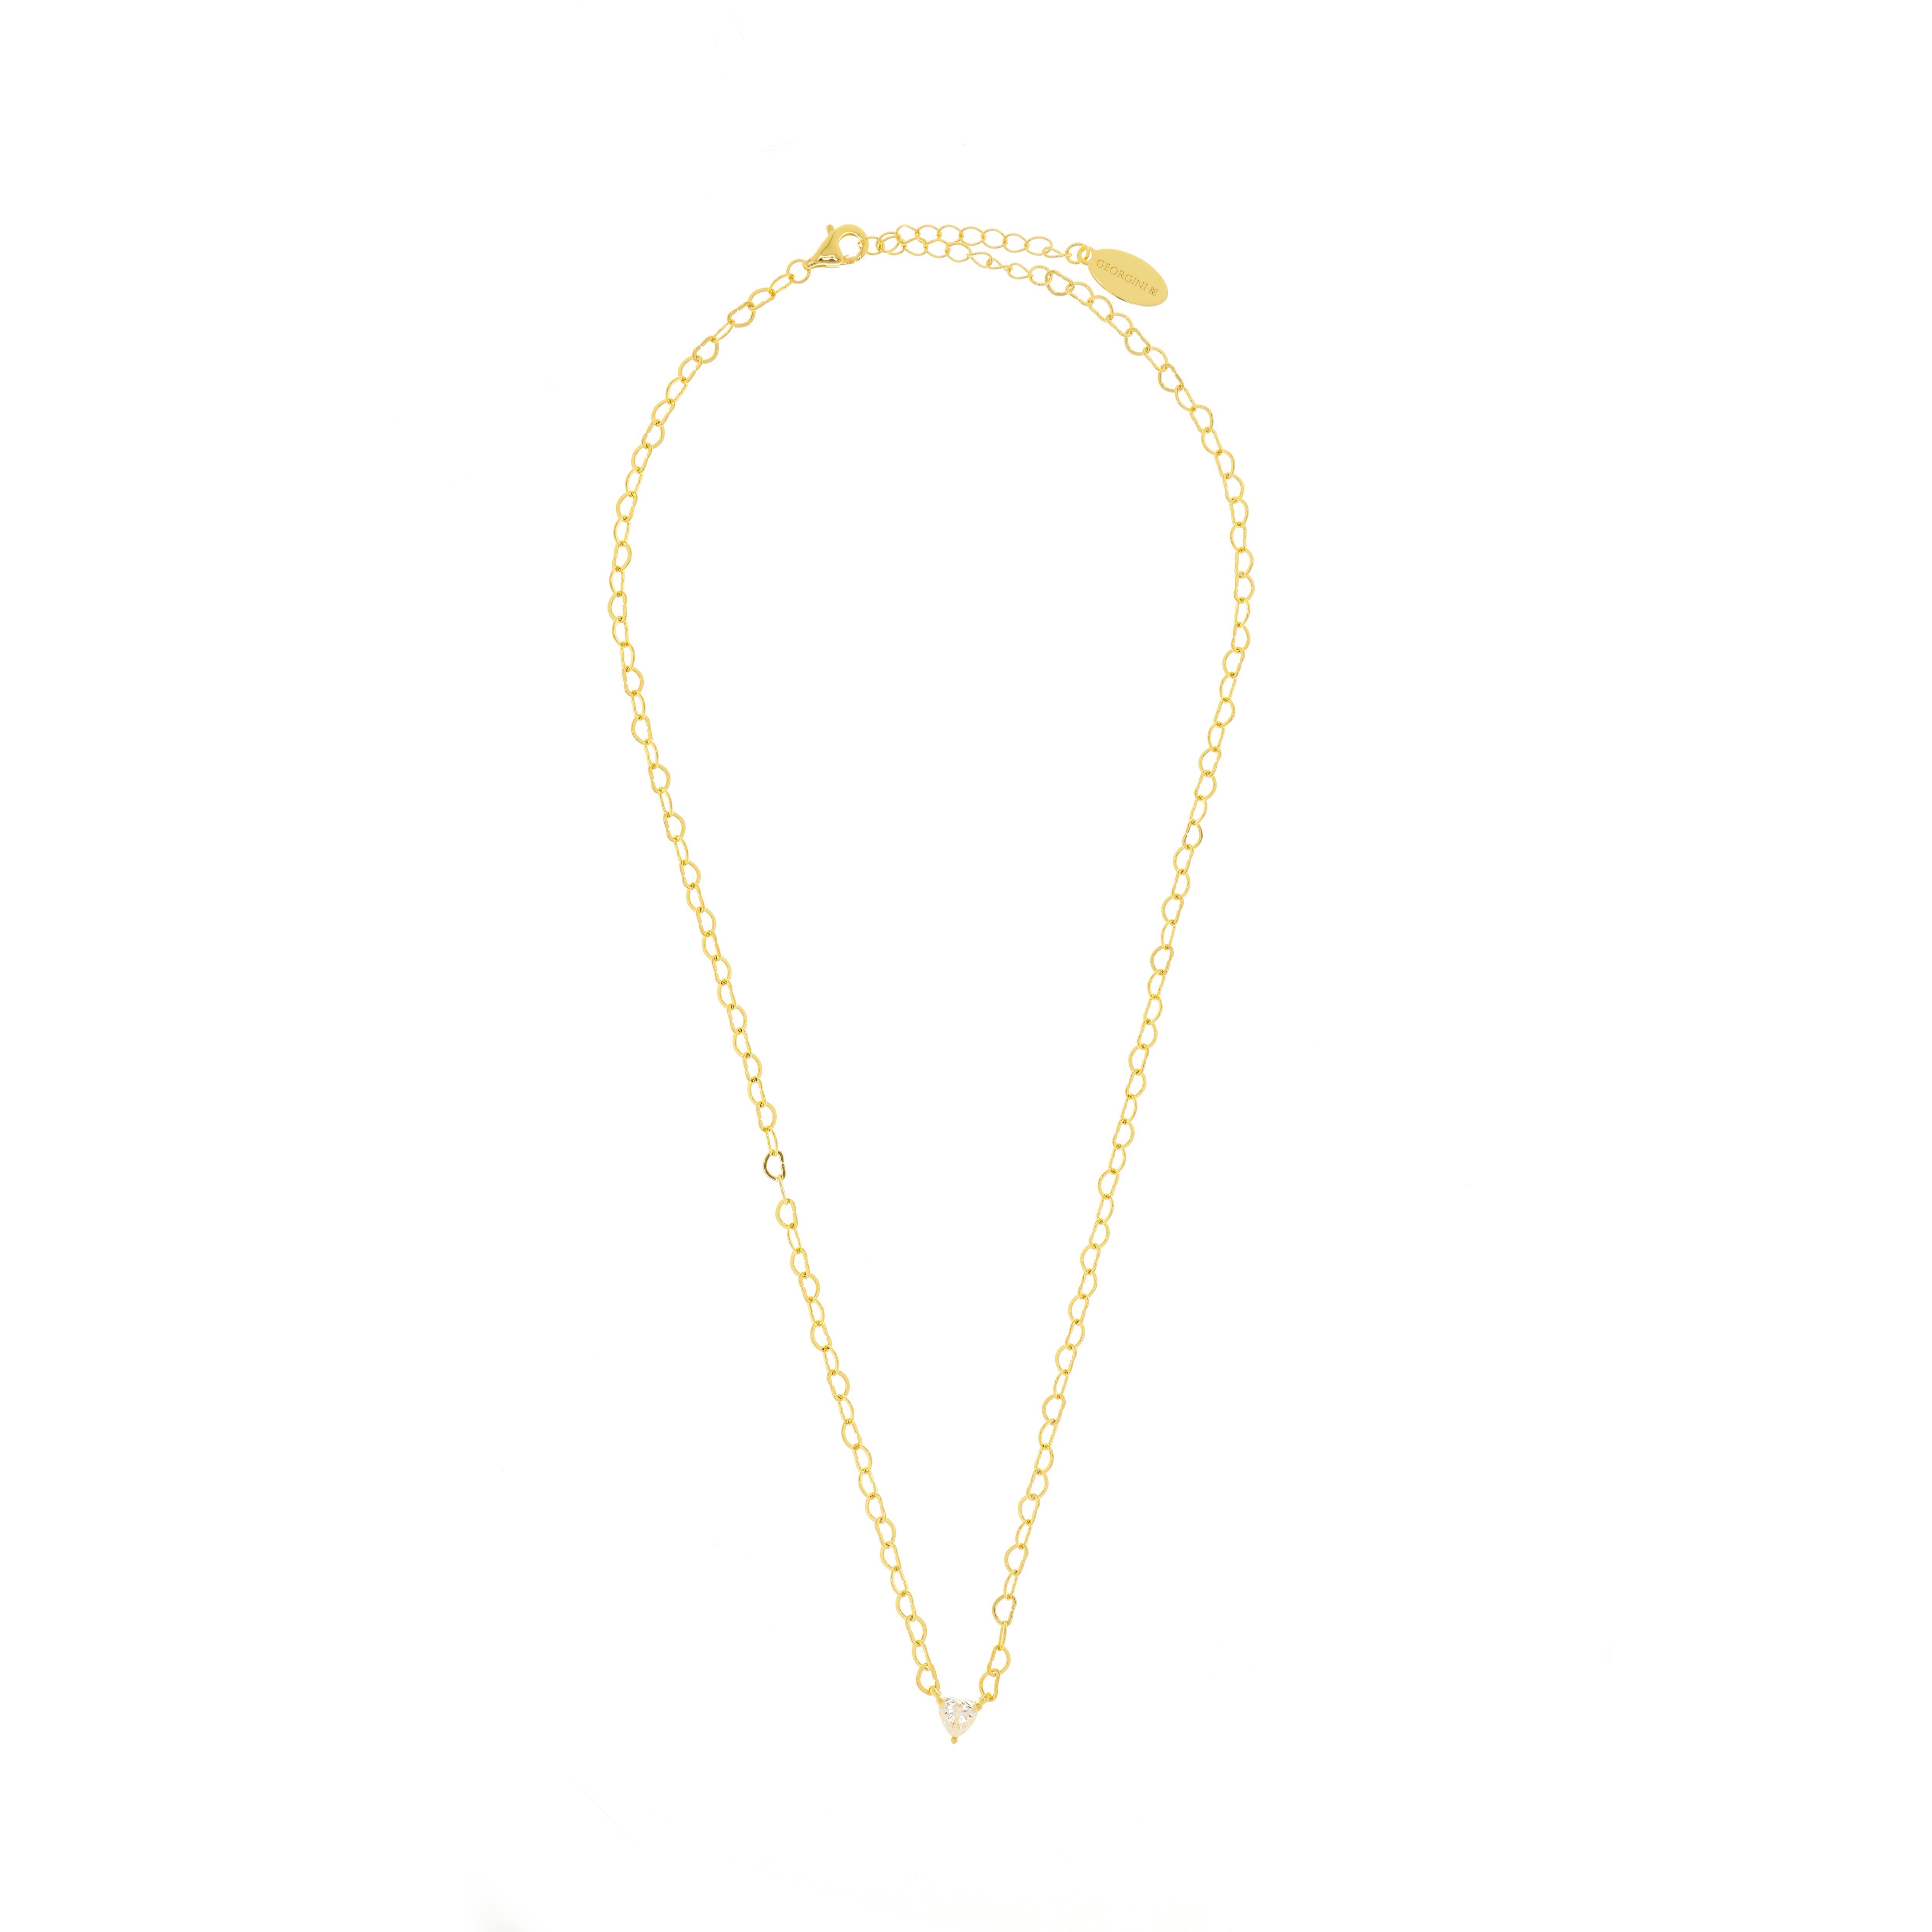 SWEETHEART HEART CHAIN NECKLACE GOLD